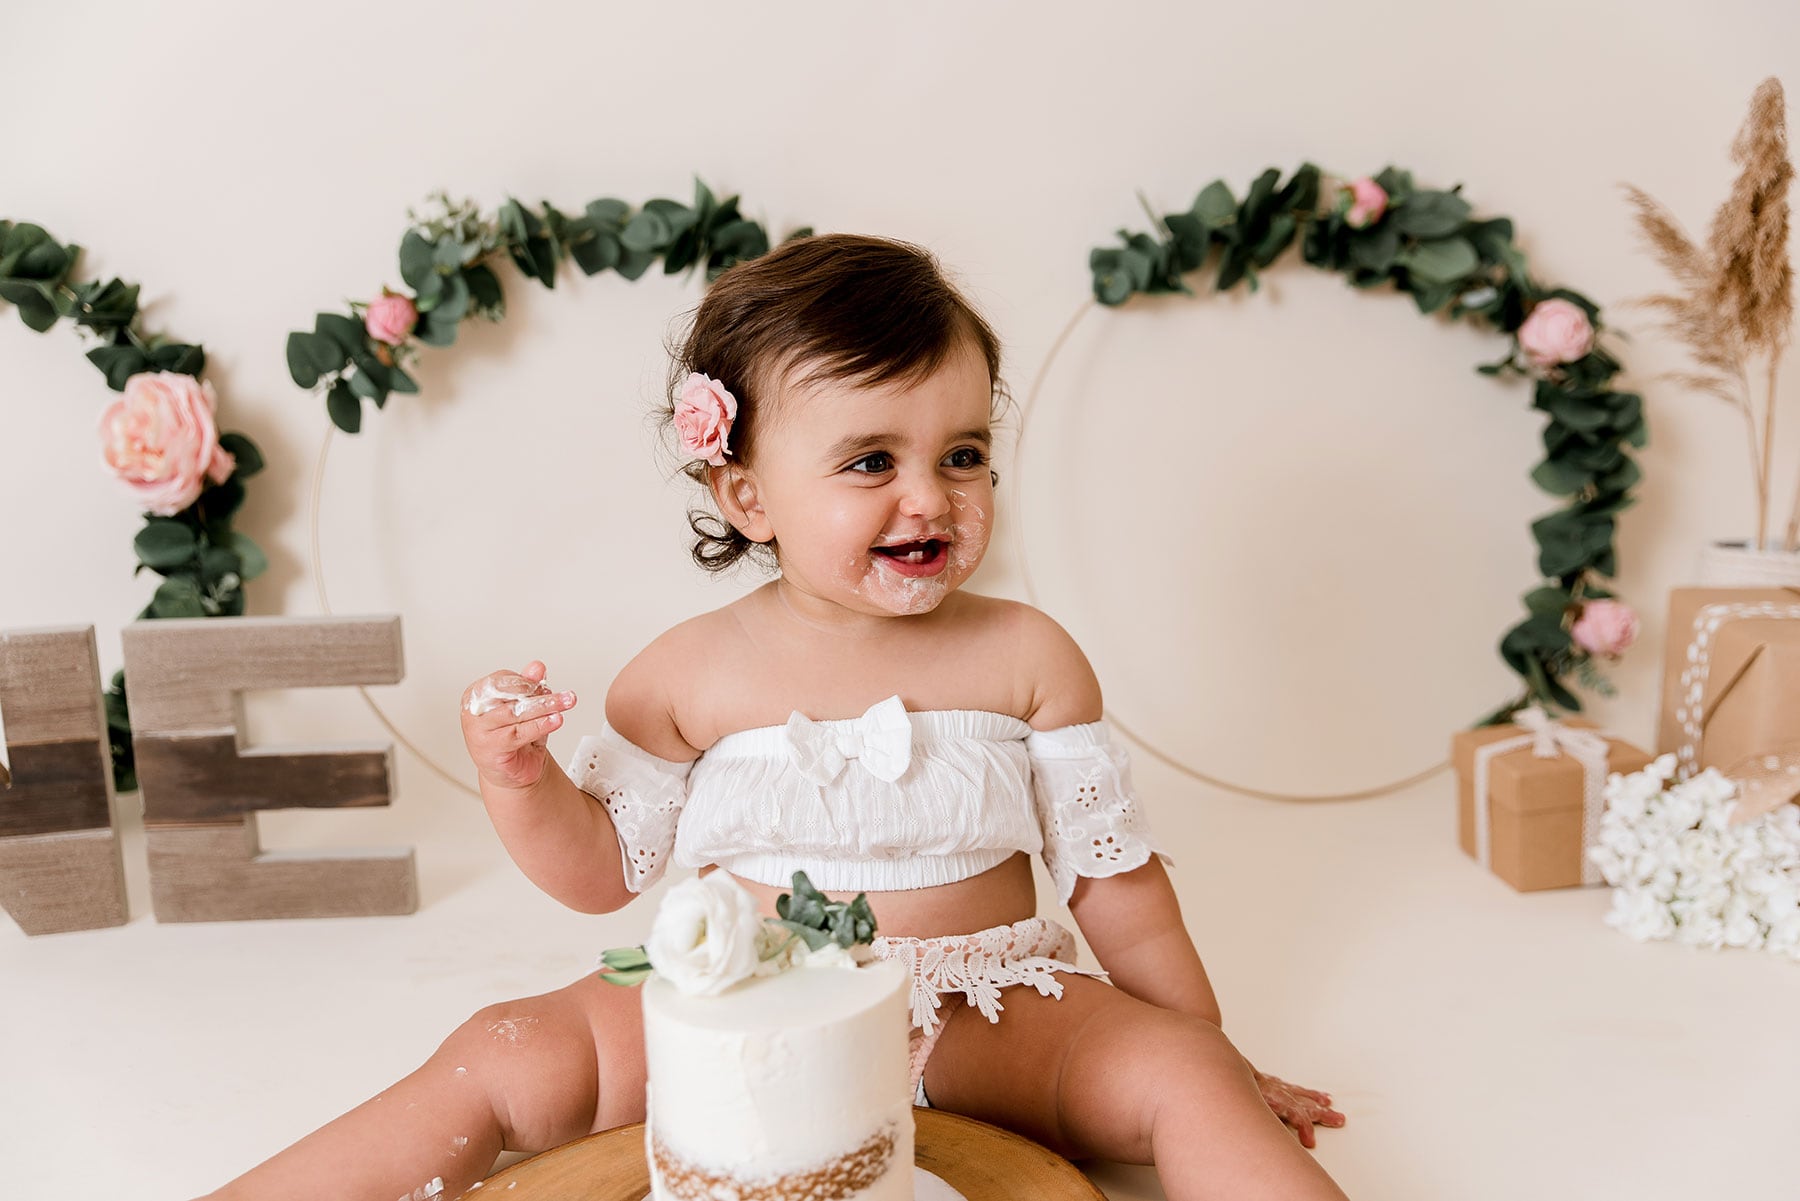 Picture of a baby with a white cake and frosting on her face